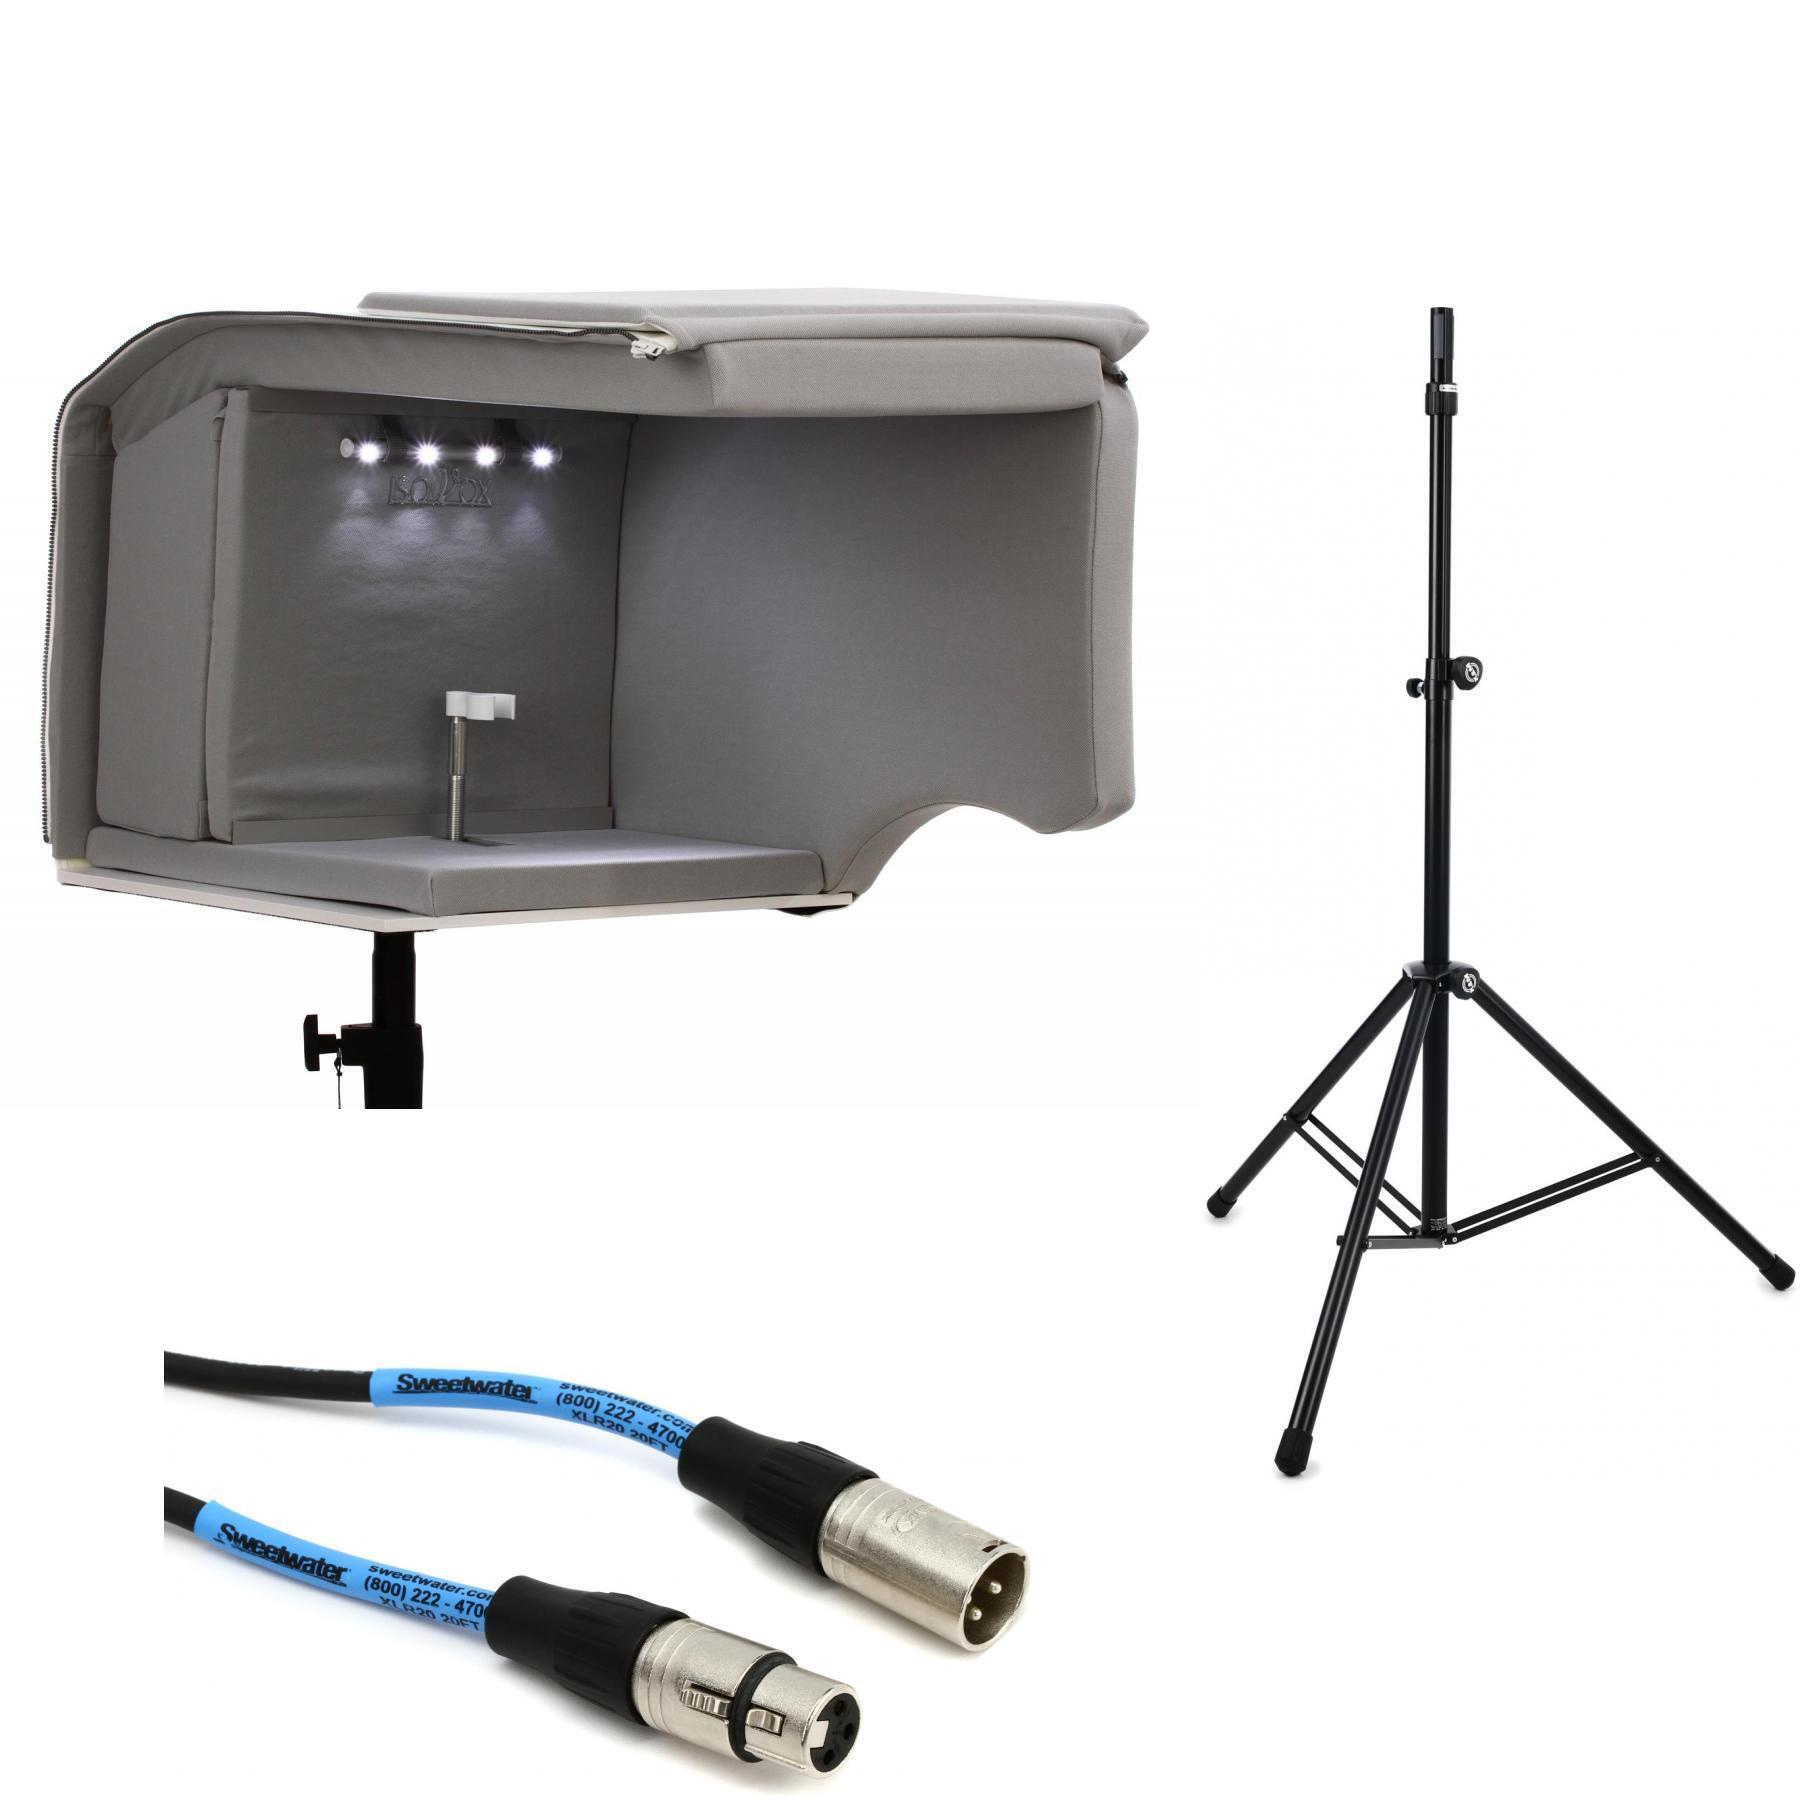 ISOVOX 2 Home Vocal Booth with Stand and Cable - White